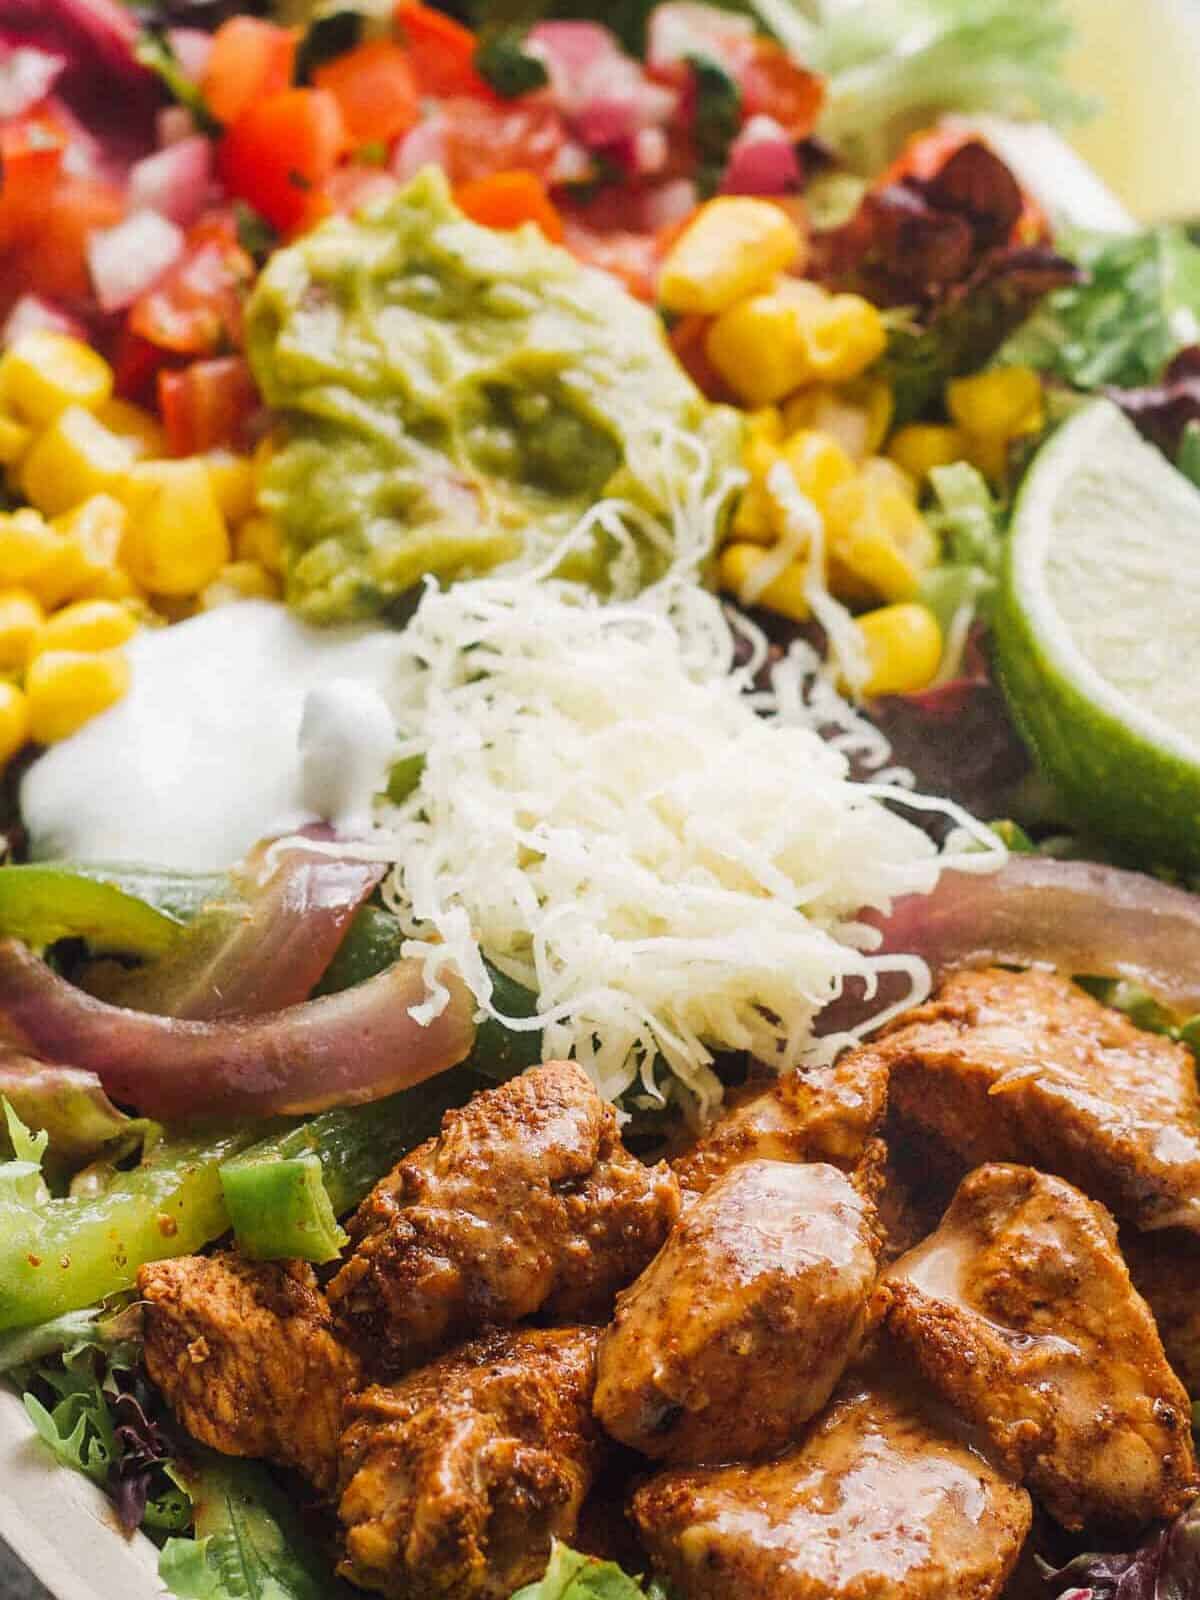 up close image of chipotle chicken salad